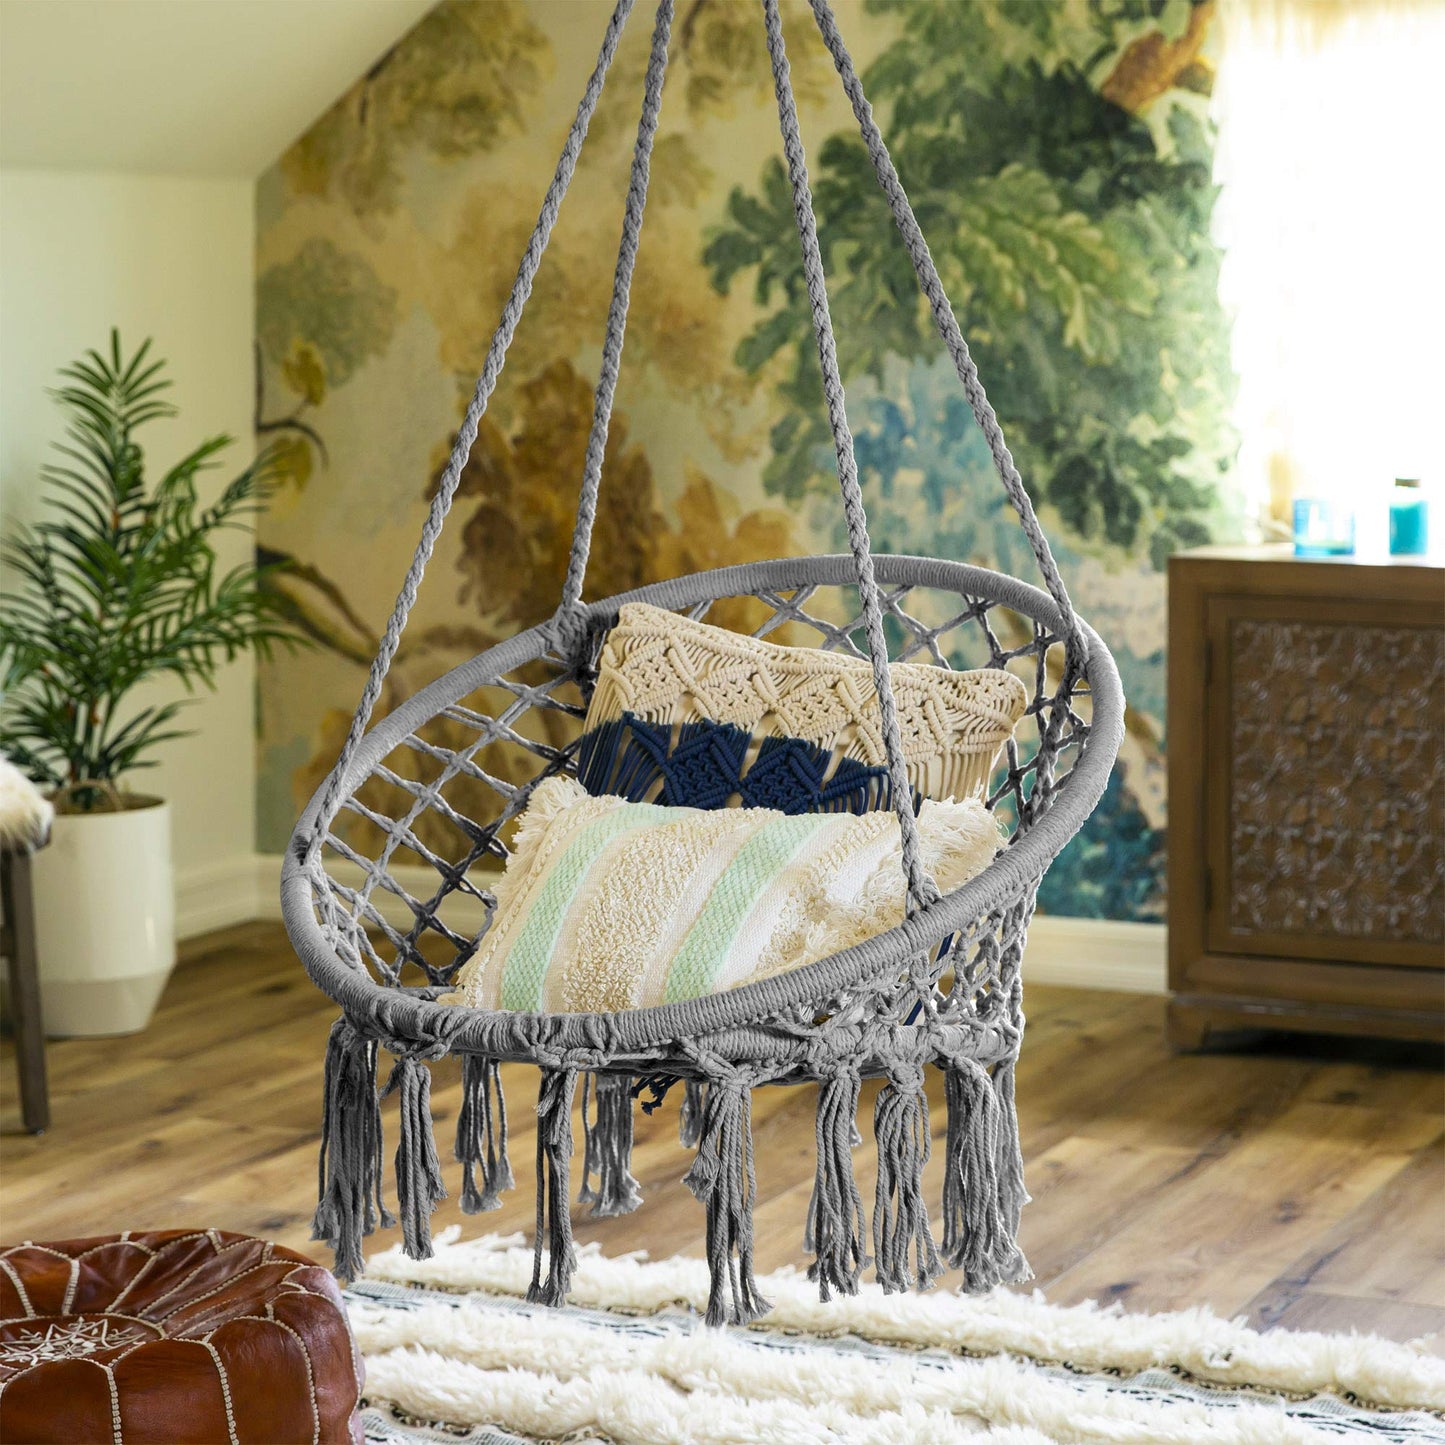 Hanging Cotton Macrame Rope Hammock Lounge Swing - Best Choice Products